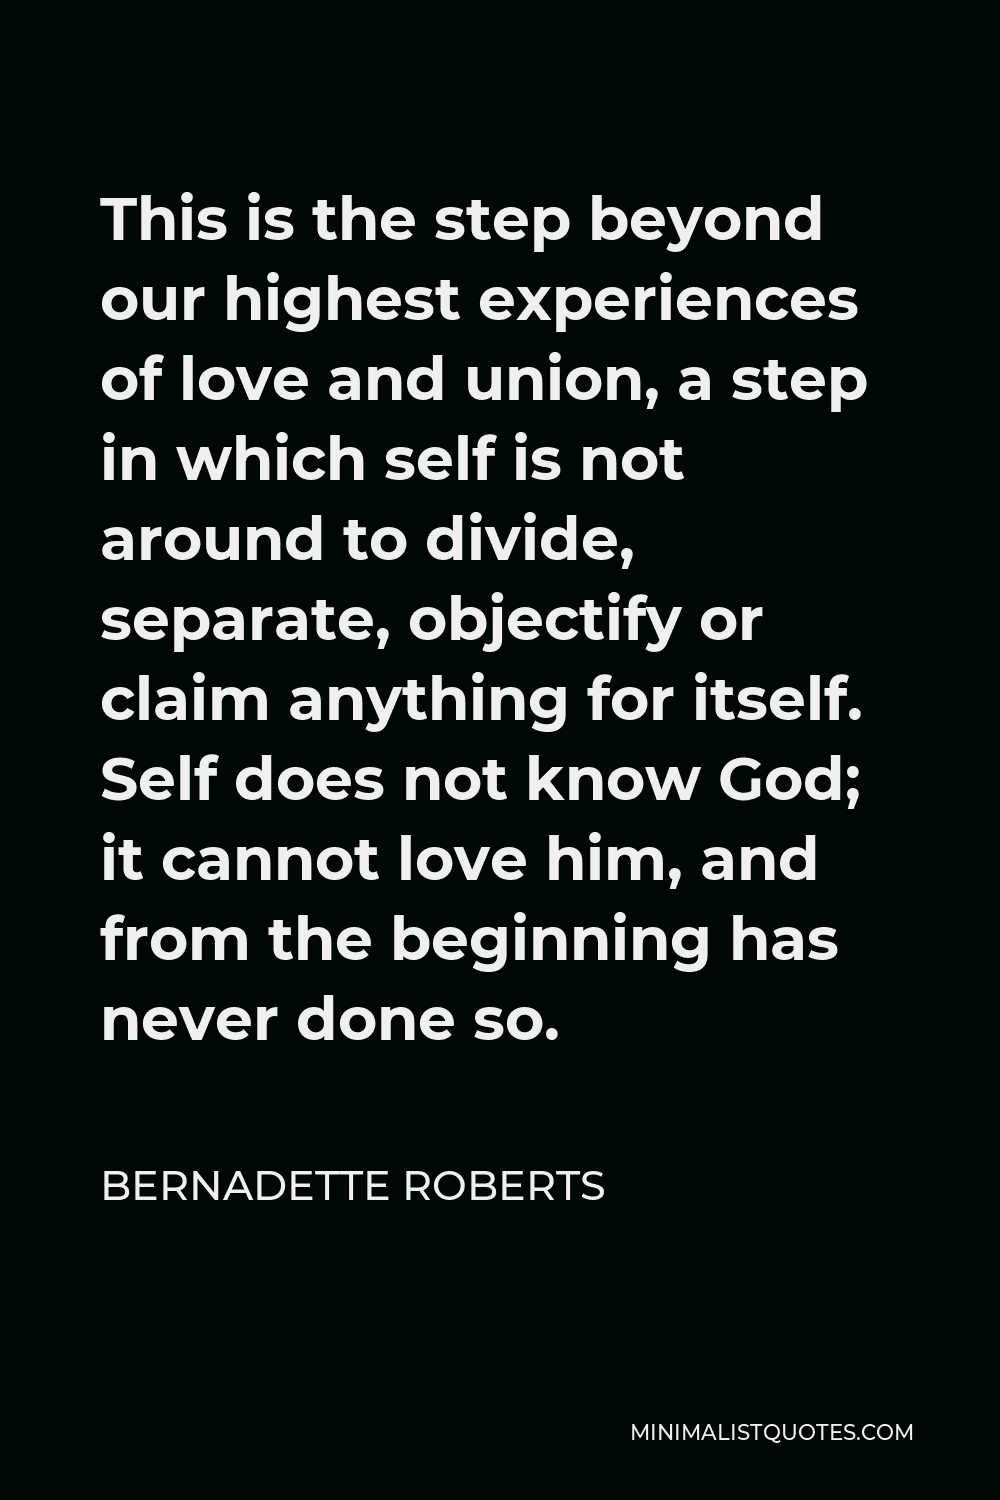 Bernadette Roberts Quote - This is the step beyond our highest experiences of love and union, a step in which self is not around to divide, separate, objectify or claim anything for itself. Self does not know God; it cannot love him, and from the beginning has never done so.